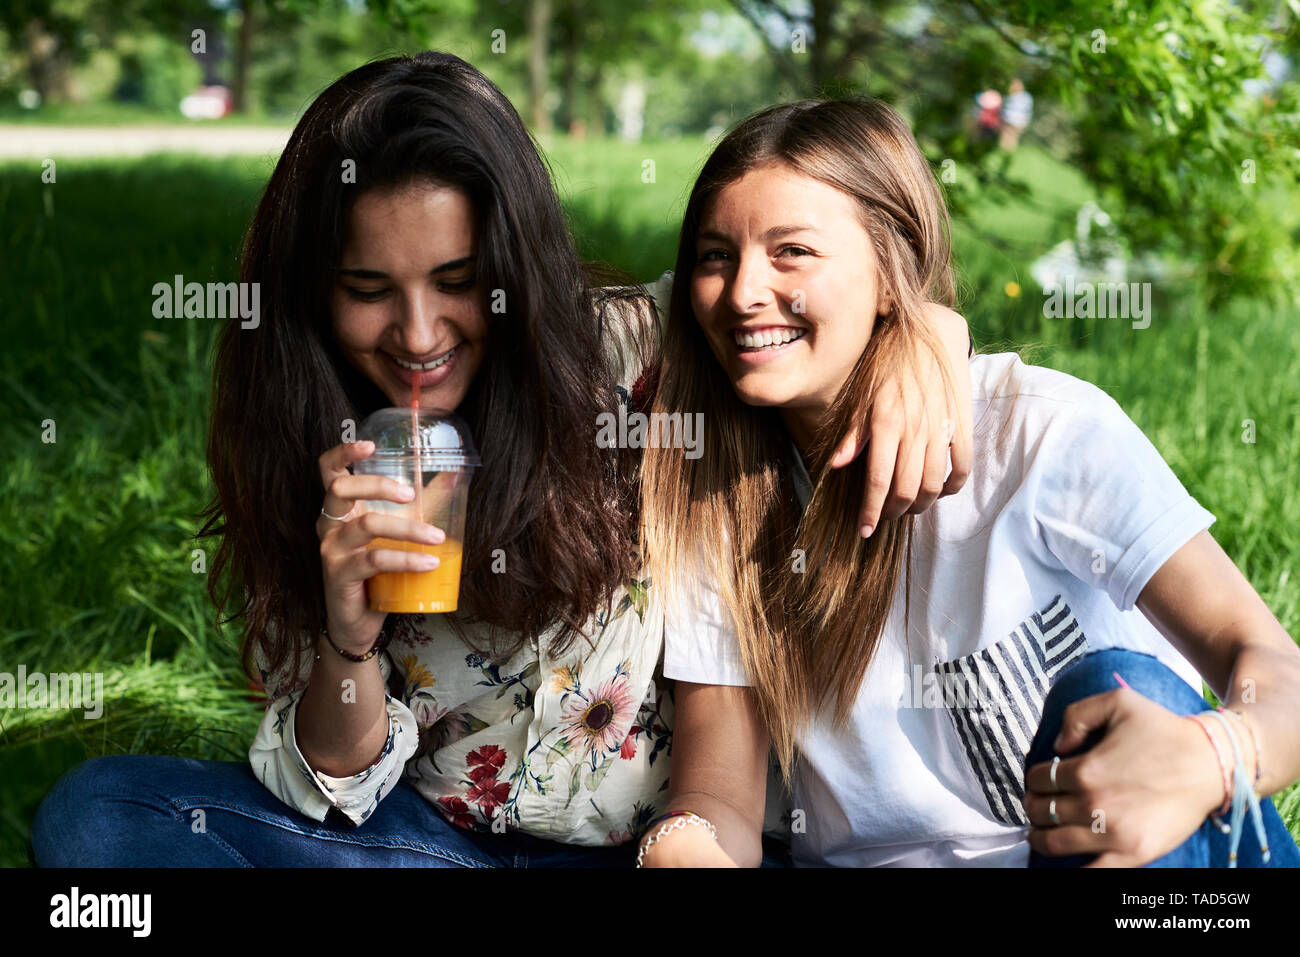 Portrait of two happy young women drinking juice at a picnic in park Stock Photo